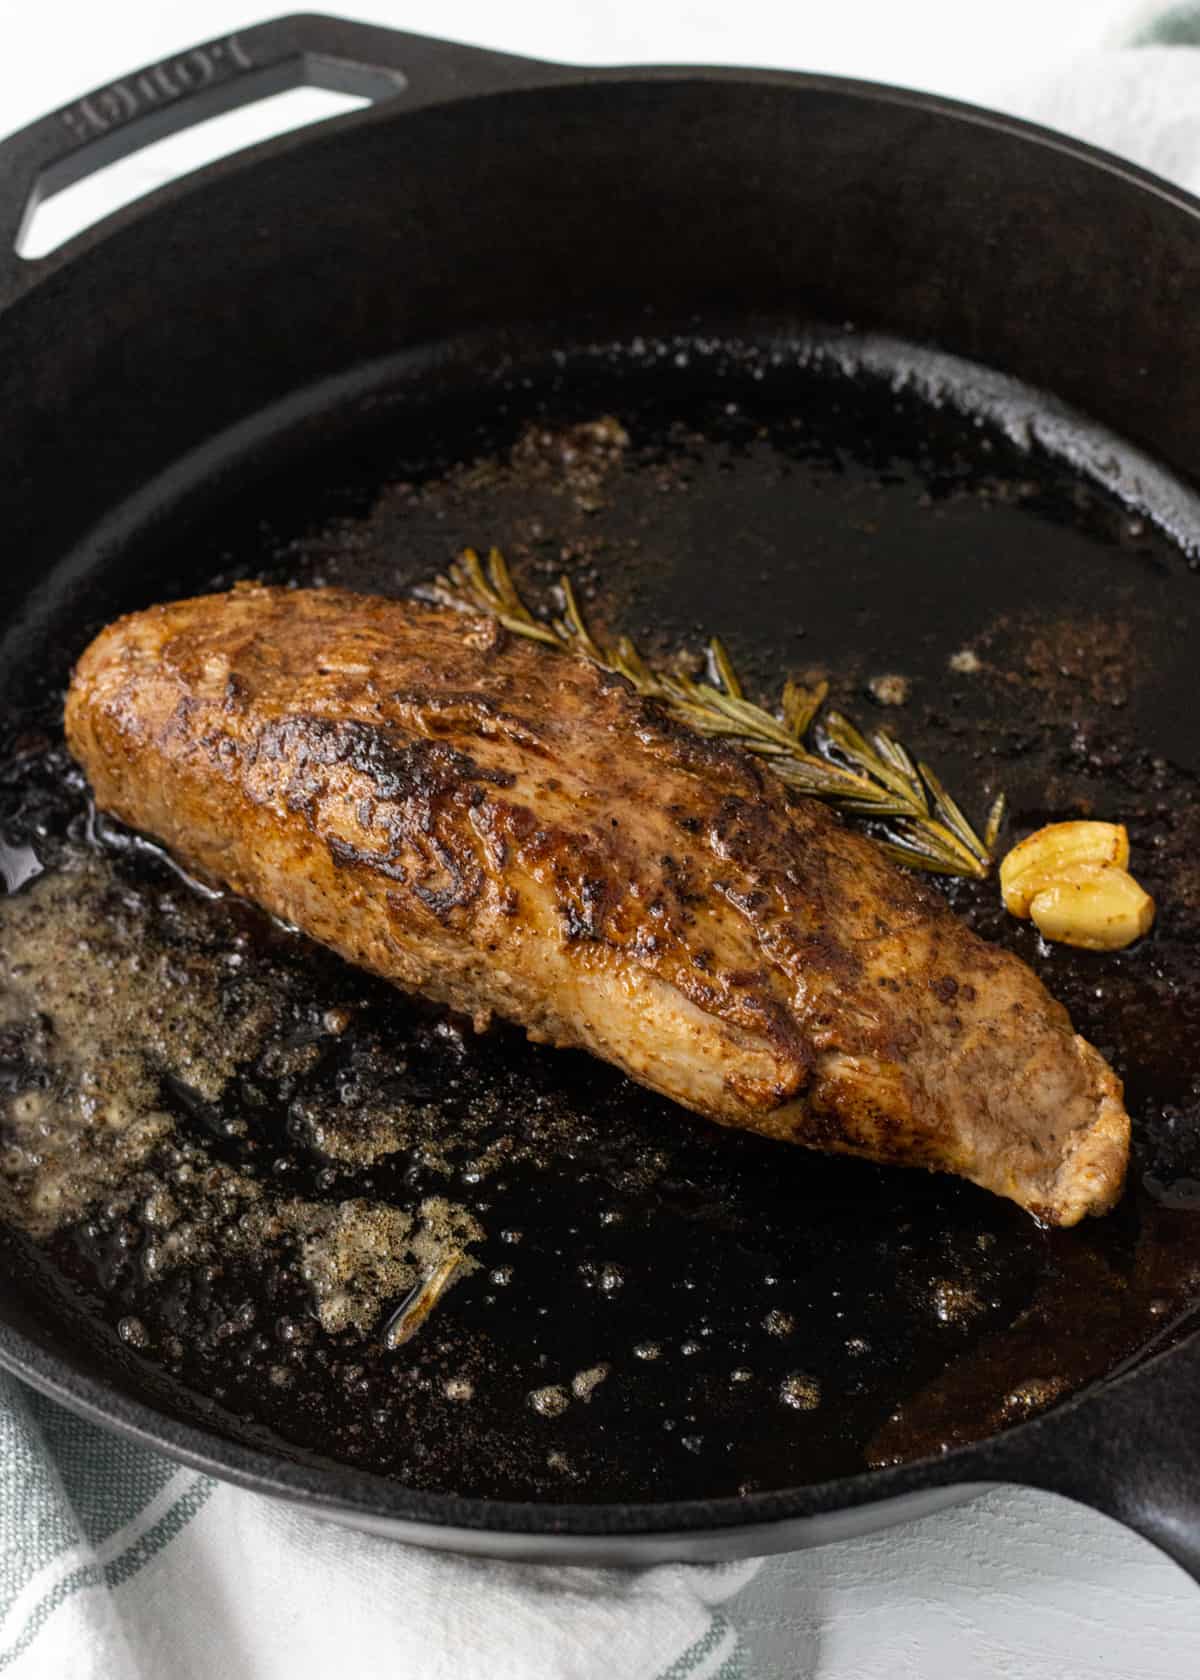 Roasted pork tenderloin in a cast iron skillet with a roasted sprig of rosemary and garlic clove.